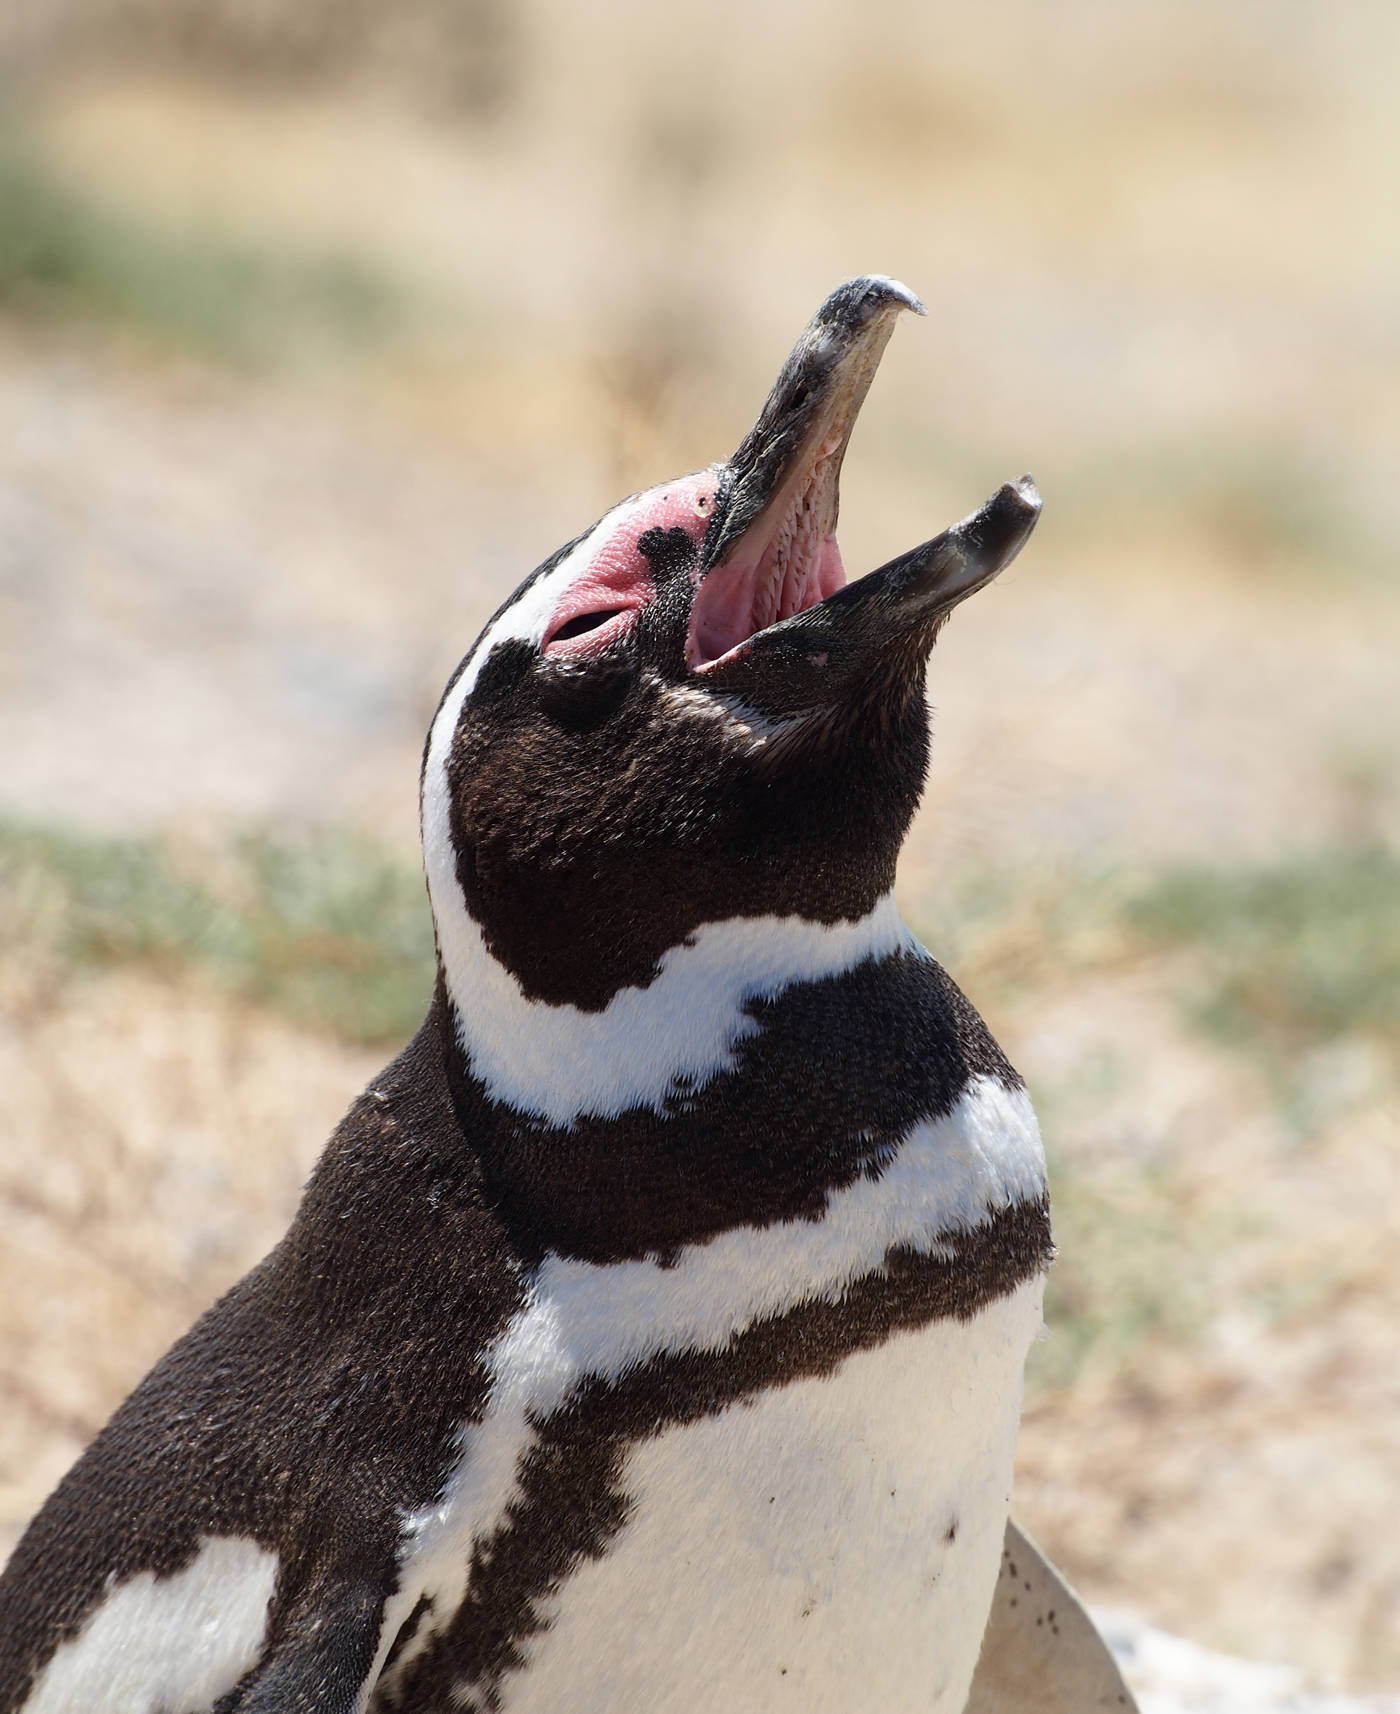 Magellanic Penguins are only found along the coast of southern South America, not Antarctica. They are named after Ferdinand Magellan, the first European (Portuguese) to navigate around the tip of South America in 1520. (Photo courtesy John &